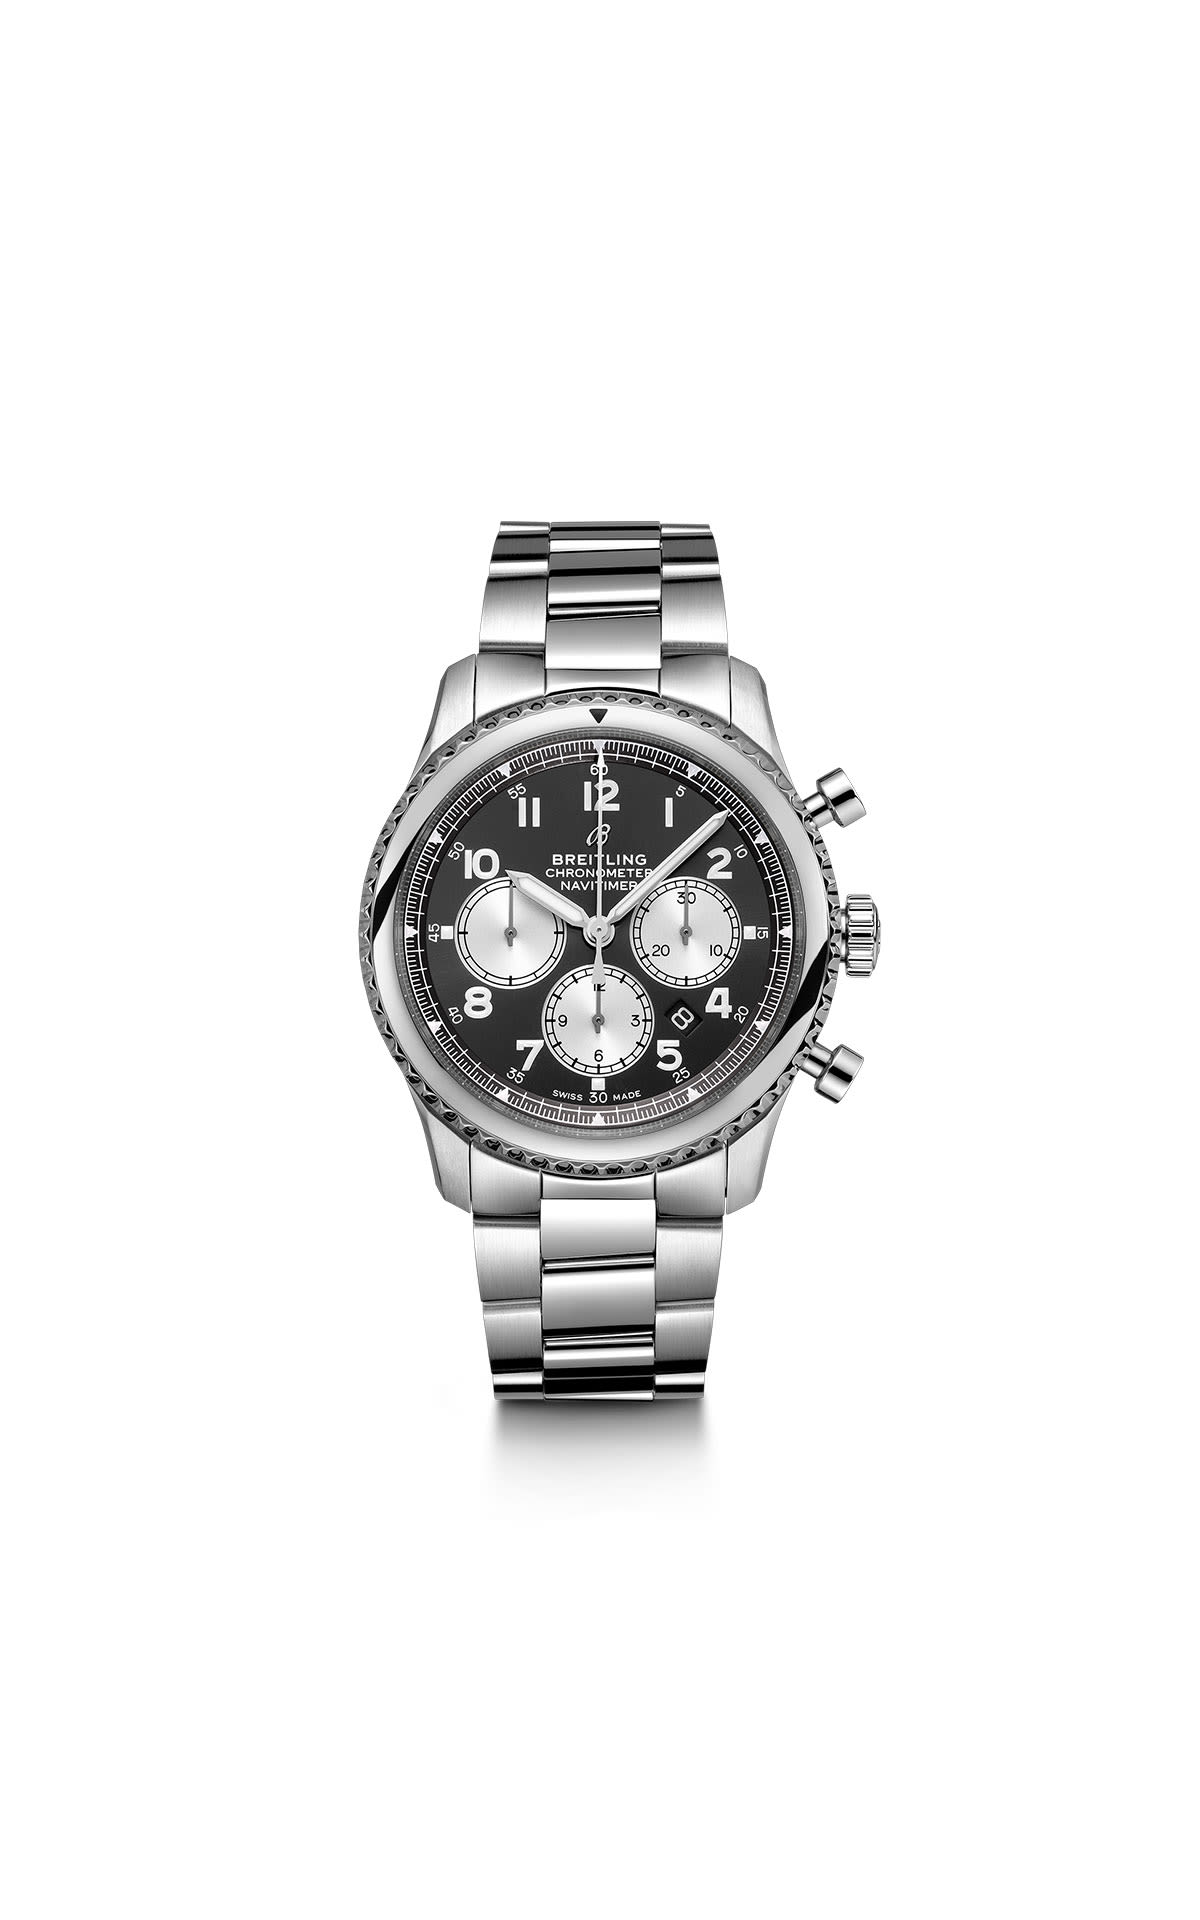 Breitling Navitimer 8 B01 Chronograph 43 from Bicester Village